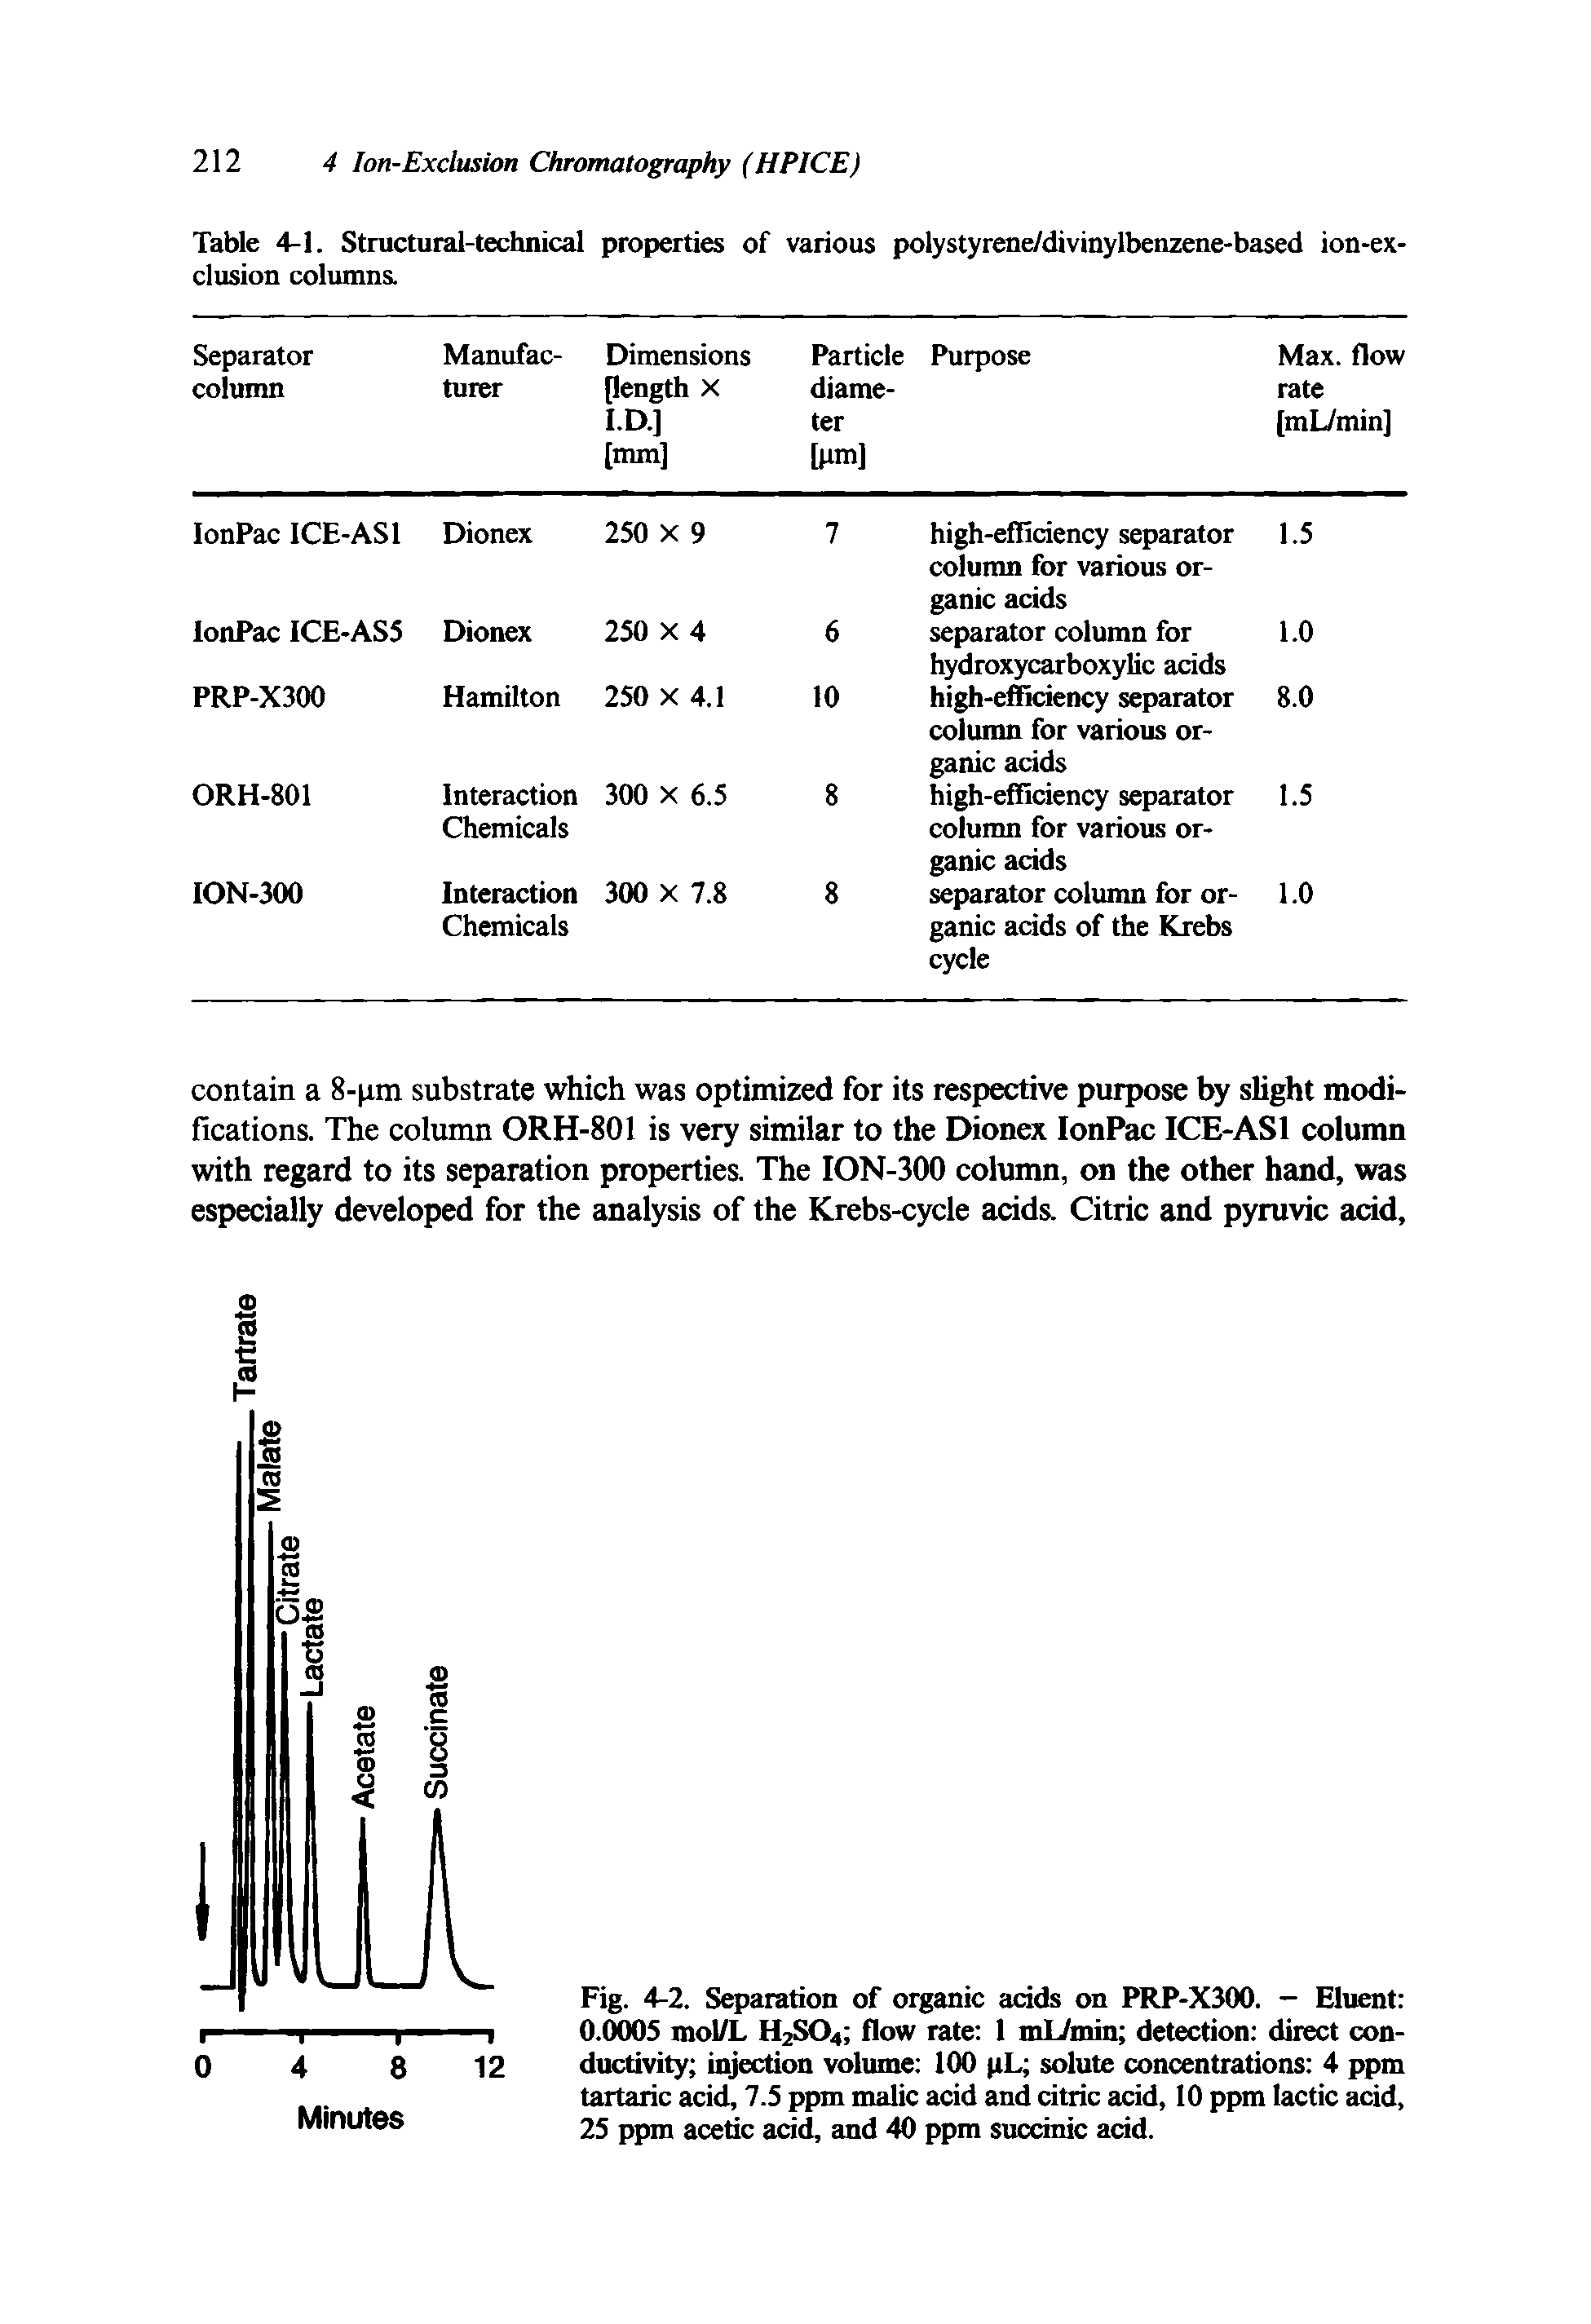 Fig. 4-2. Separation of organic acids on PRP-X300. - Eluent 0.0005 mol/L H2S04 flow rate 1 mL/min detection direct conductivity injection volume 100 pL solute concentrations 4 ppm tartaric acid, 7.5 ppm malic acid and citric acid, 10 ppm lactic acid, 25 ppm acetic acid, and 40 ppm succinic acid.